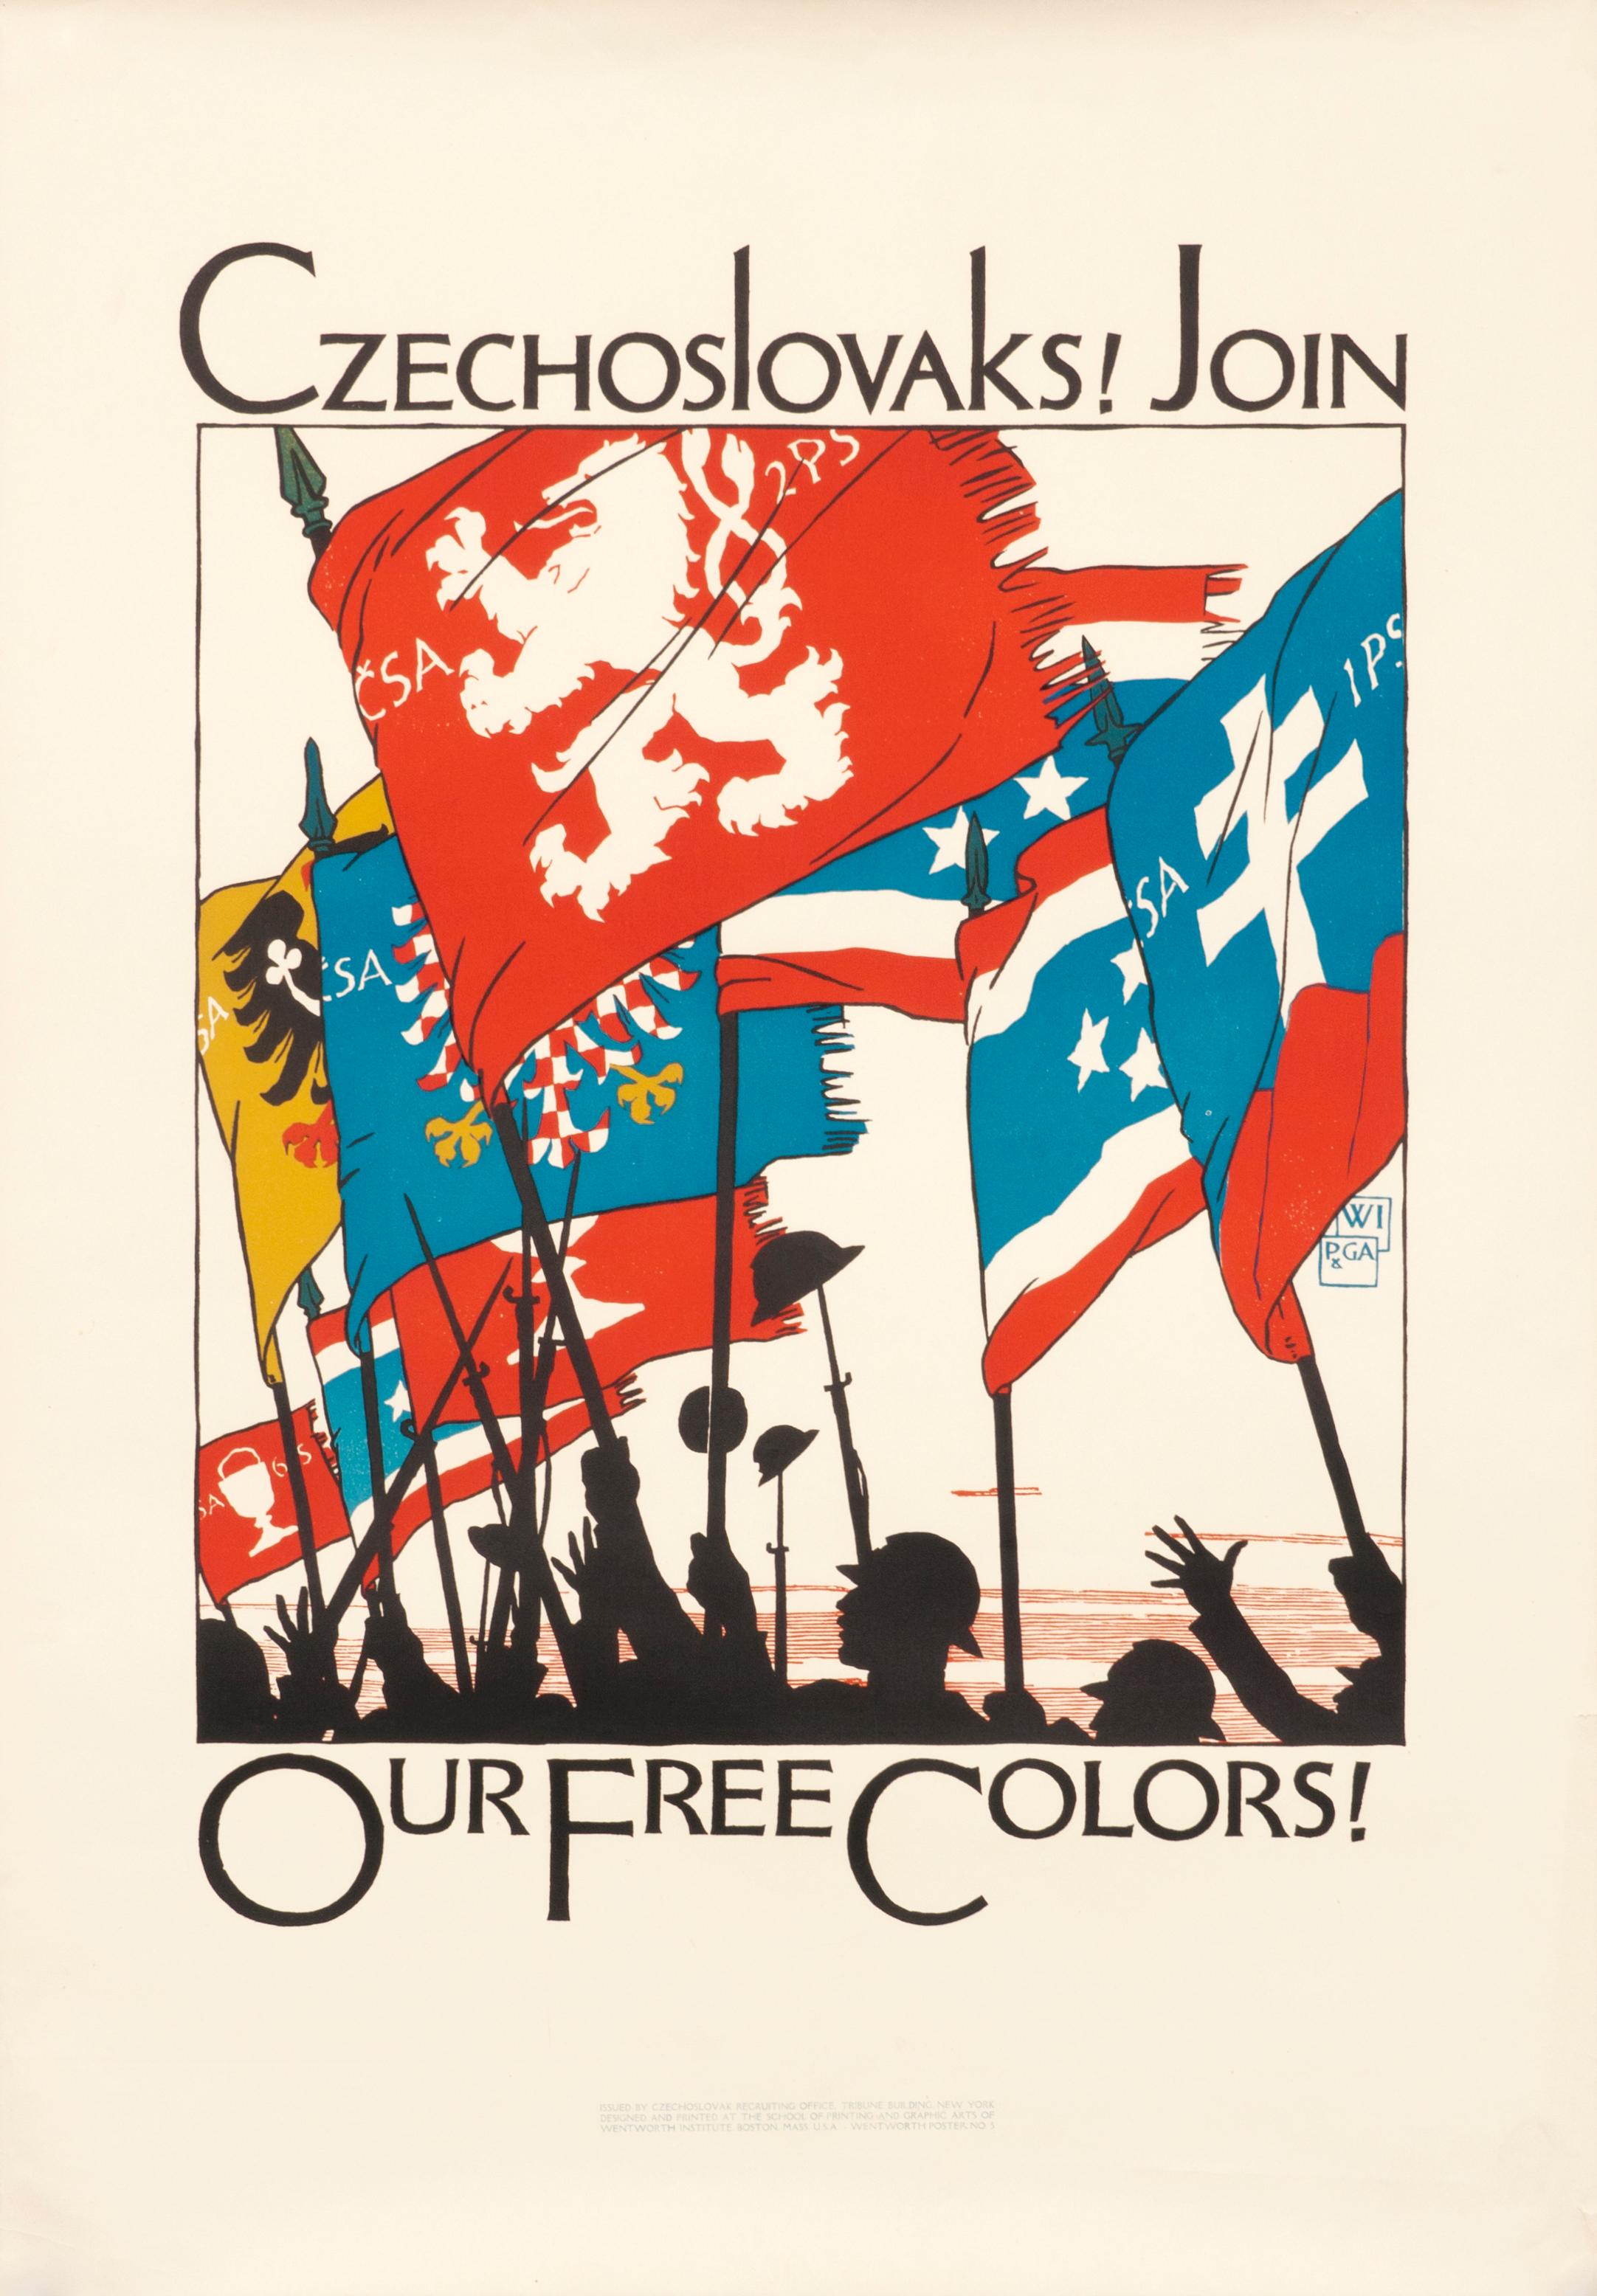 "Czechoslovaks! Join our free colors!" Original Vintage Recruiting Poster - Print by Voljtech Pressig